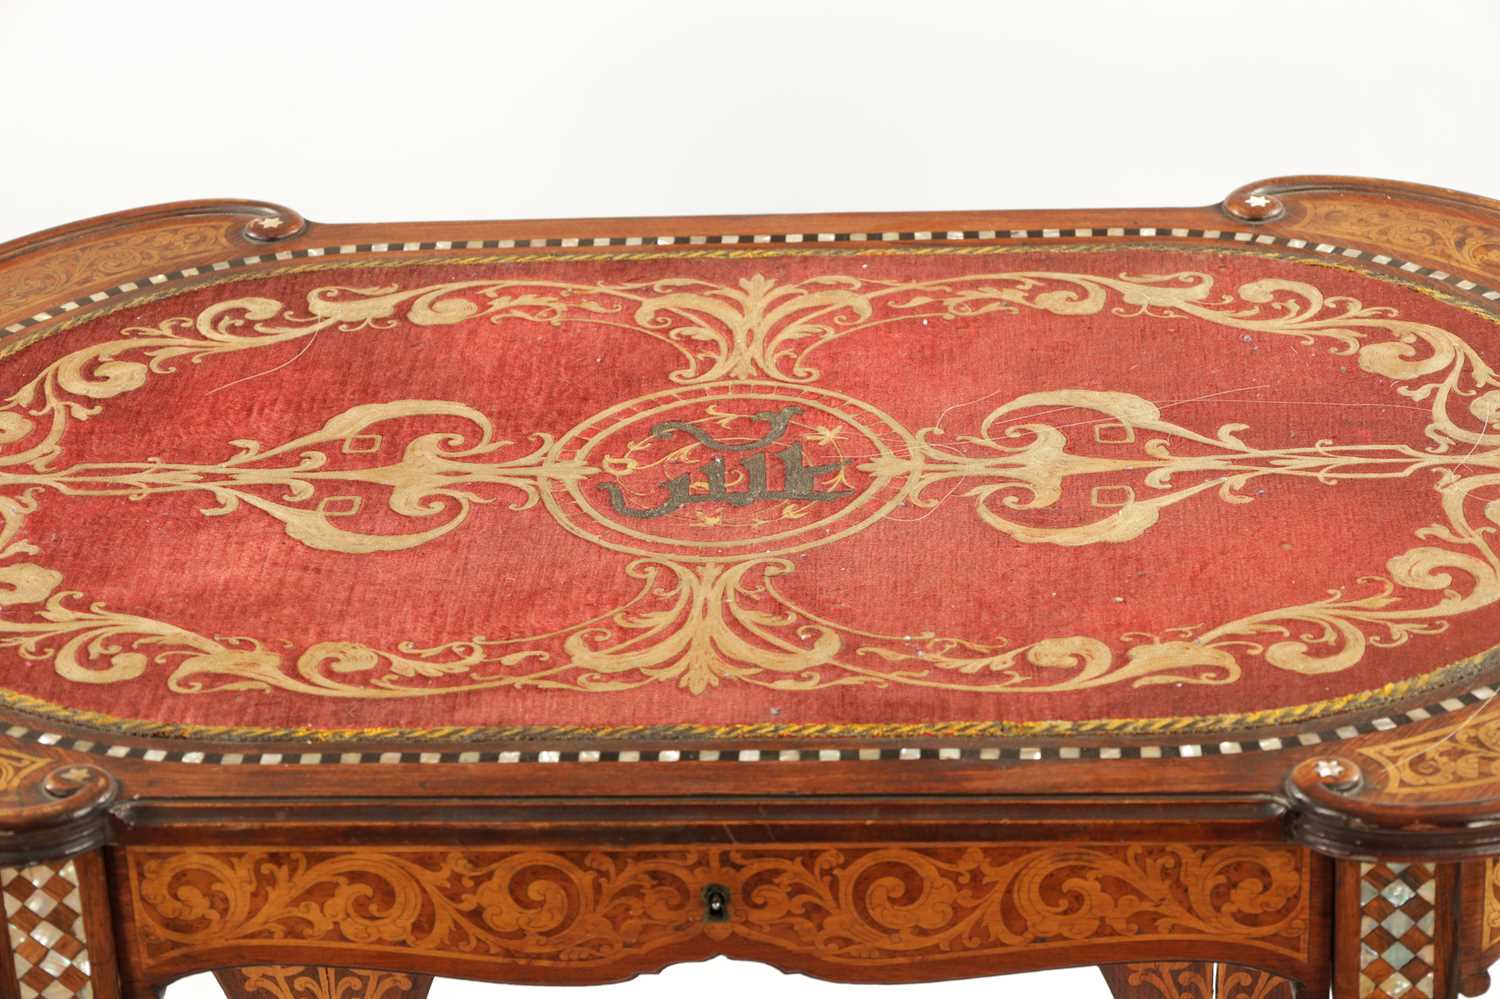 AN ART NOUVEAU OTTOMAN ISLAMIC STYLE WRITING TABLE AND TWO CHAIRS - Image 5 of 12